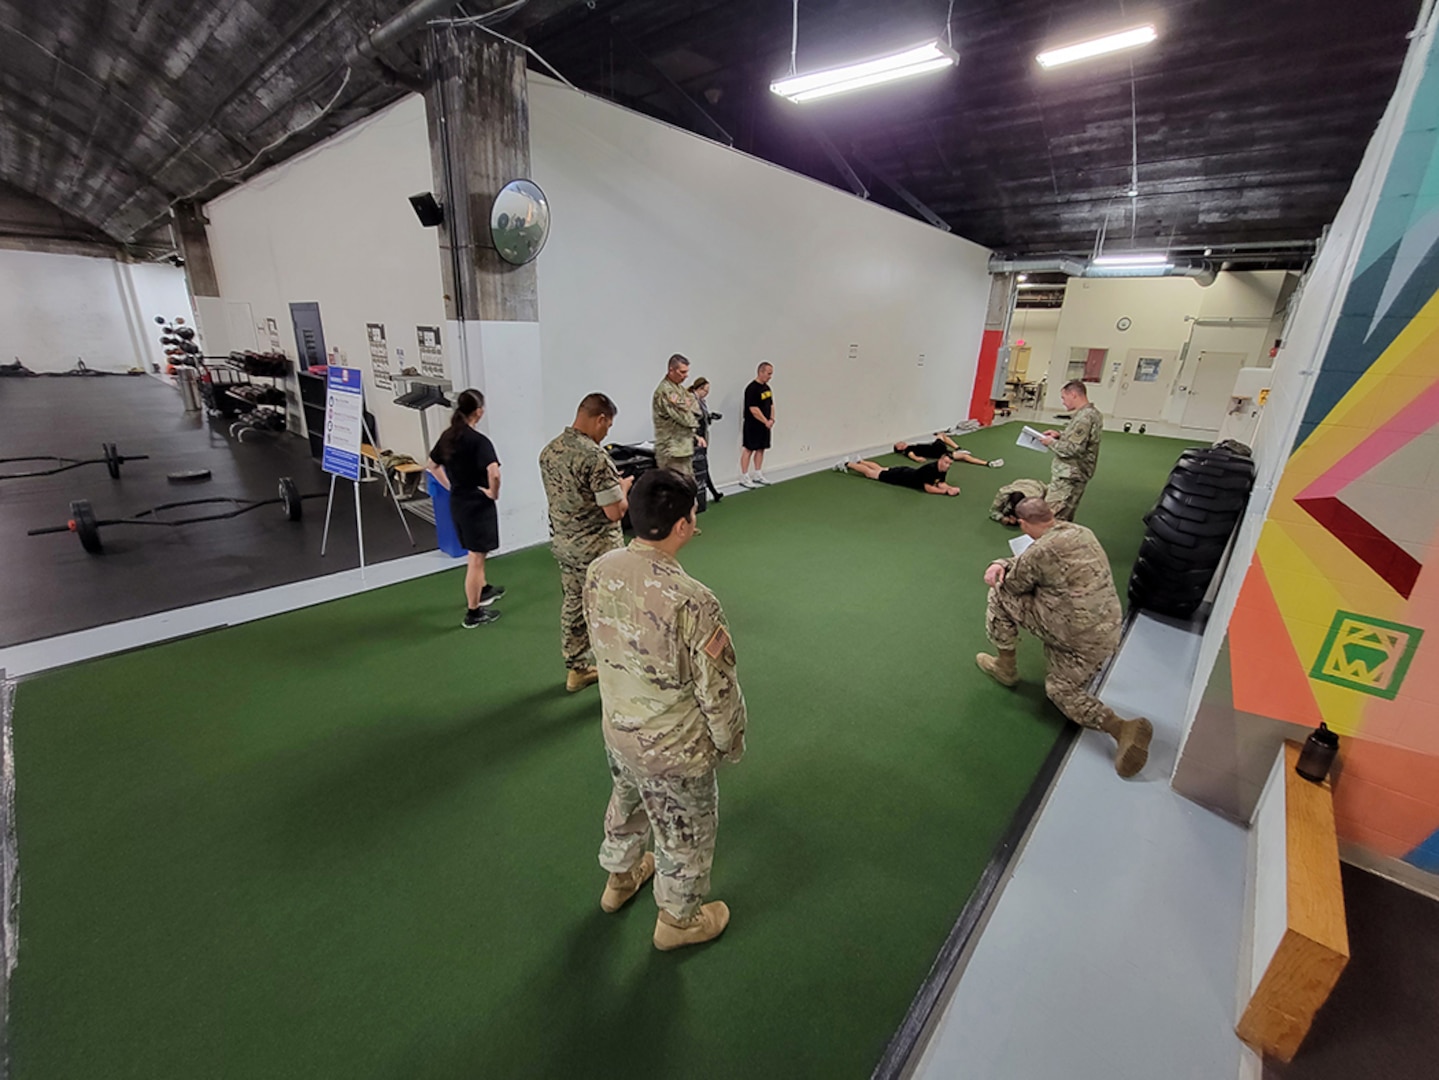 People in Army OCP uniforms and black fitness gear listen to instructions inside a fitness center.